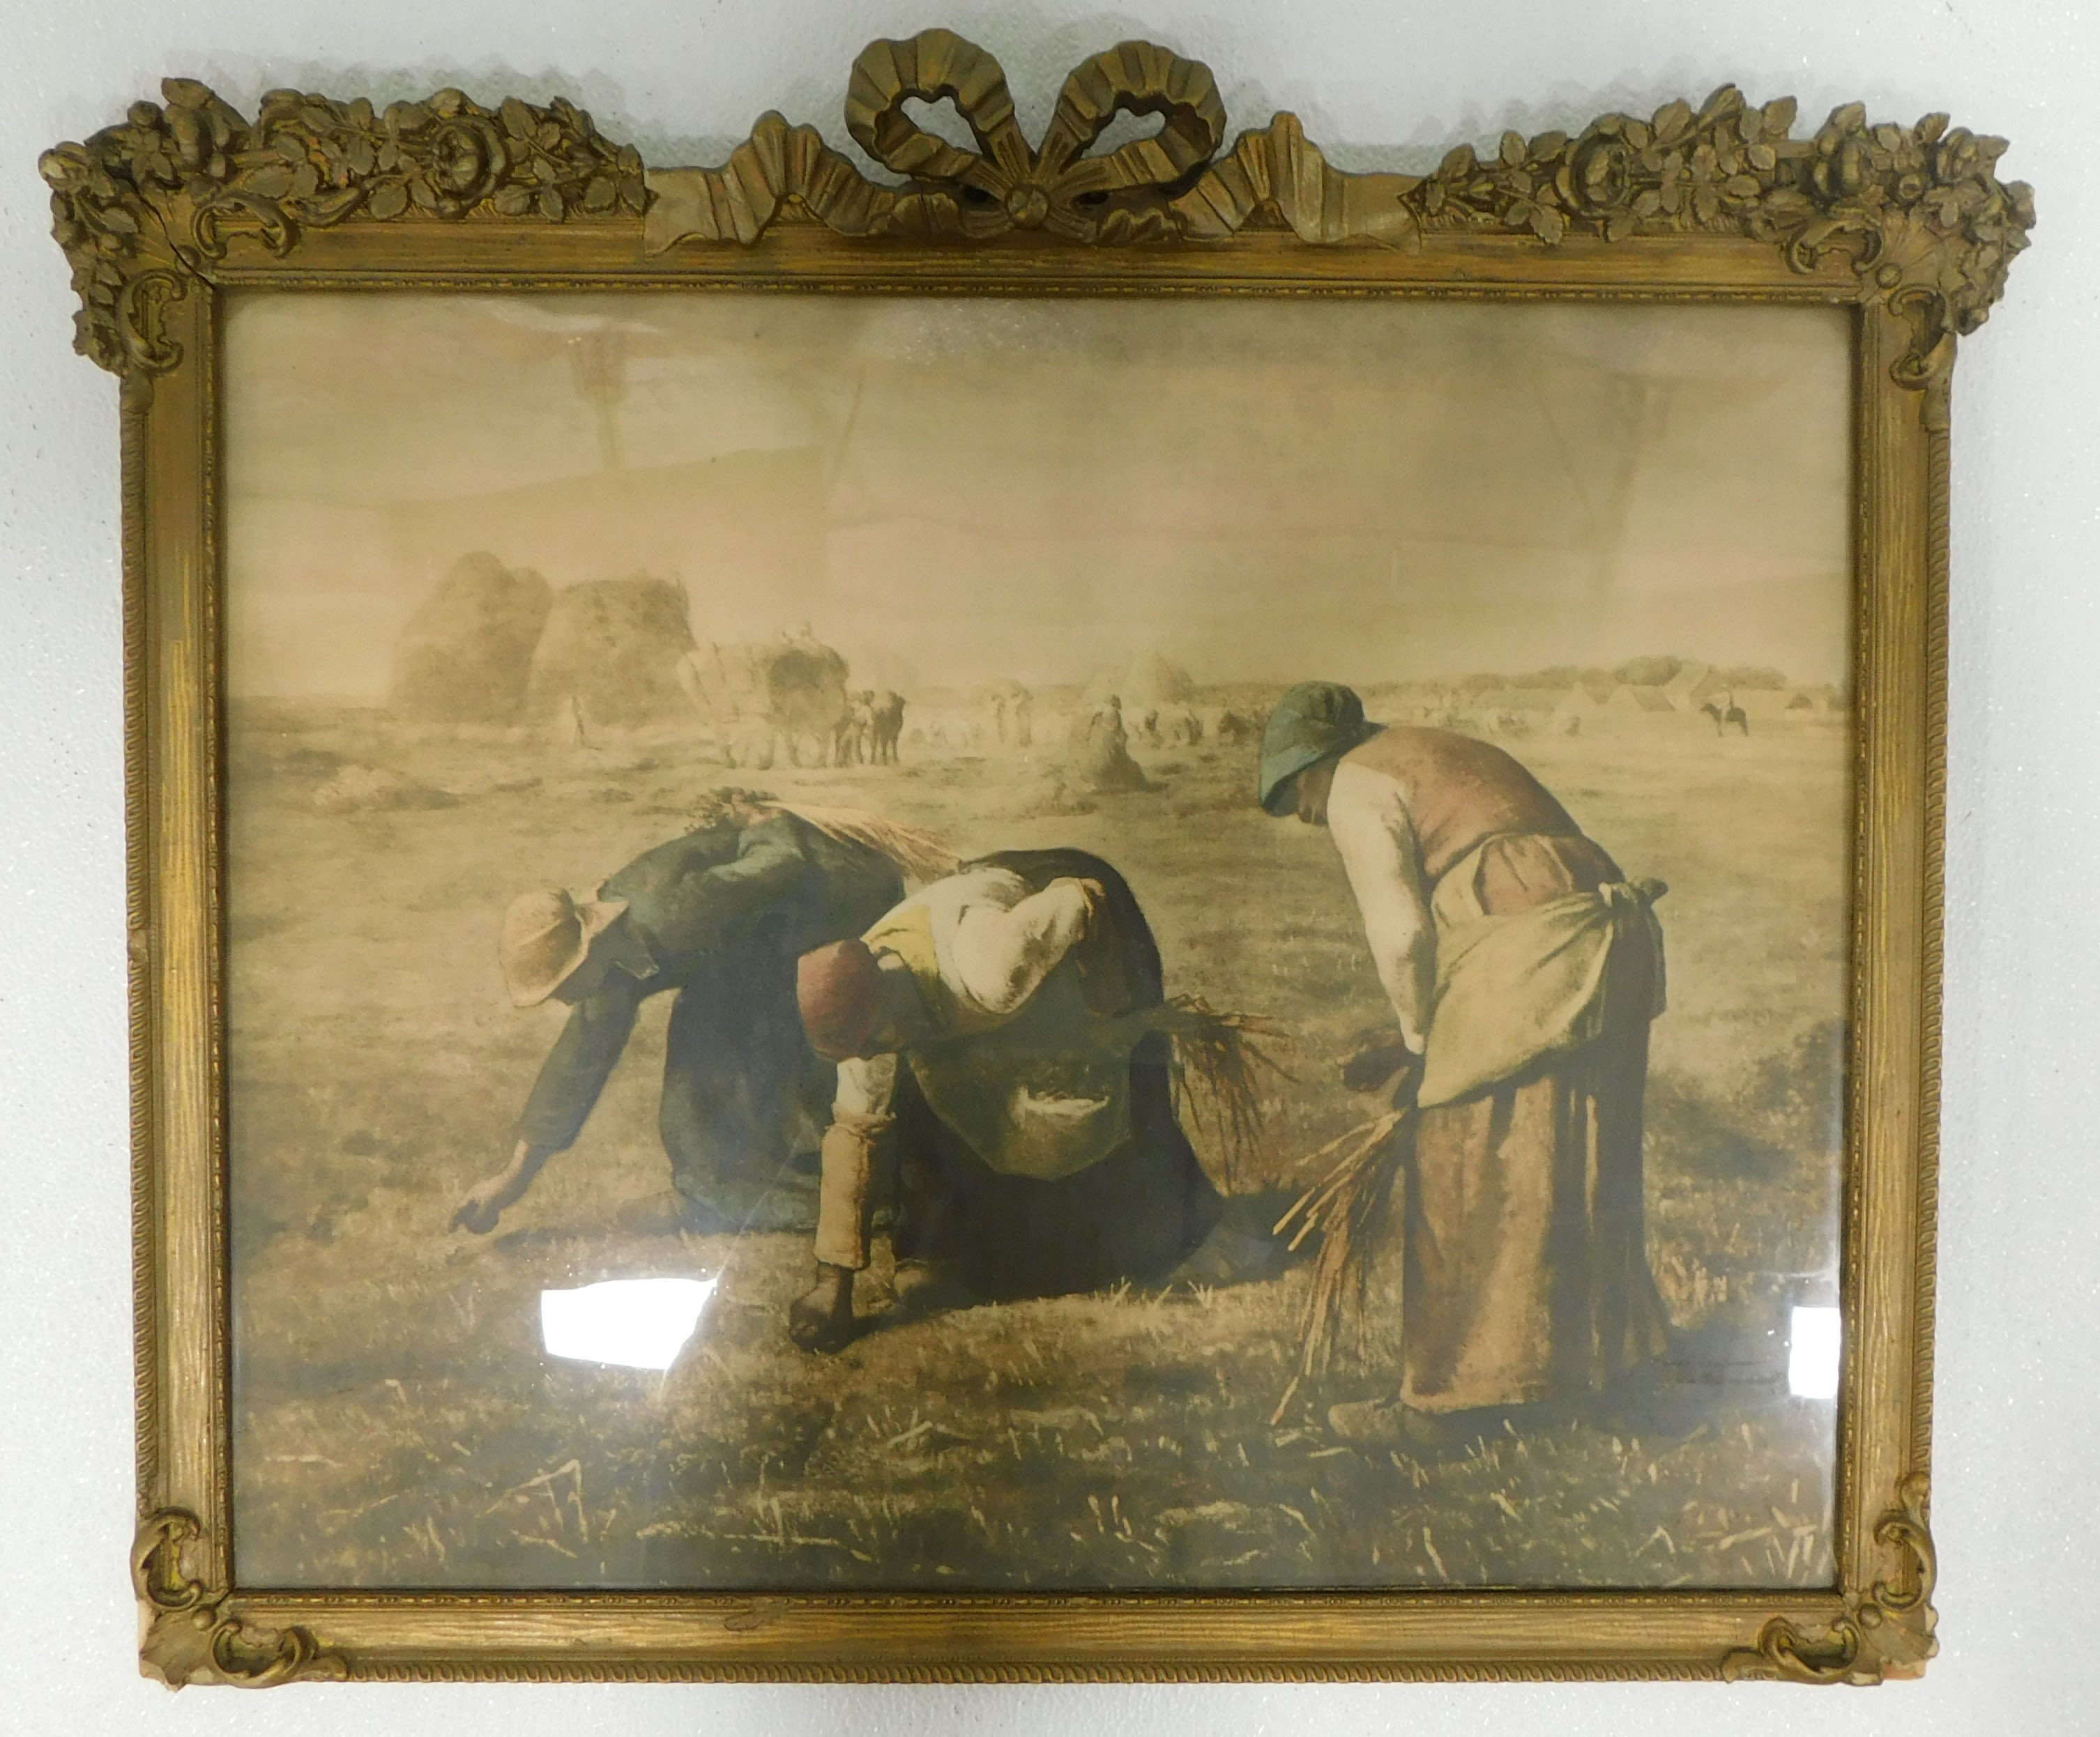 millet the gleaners